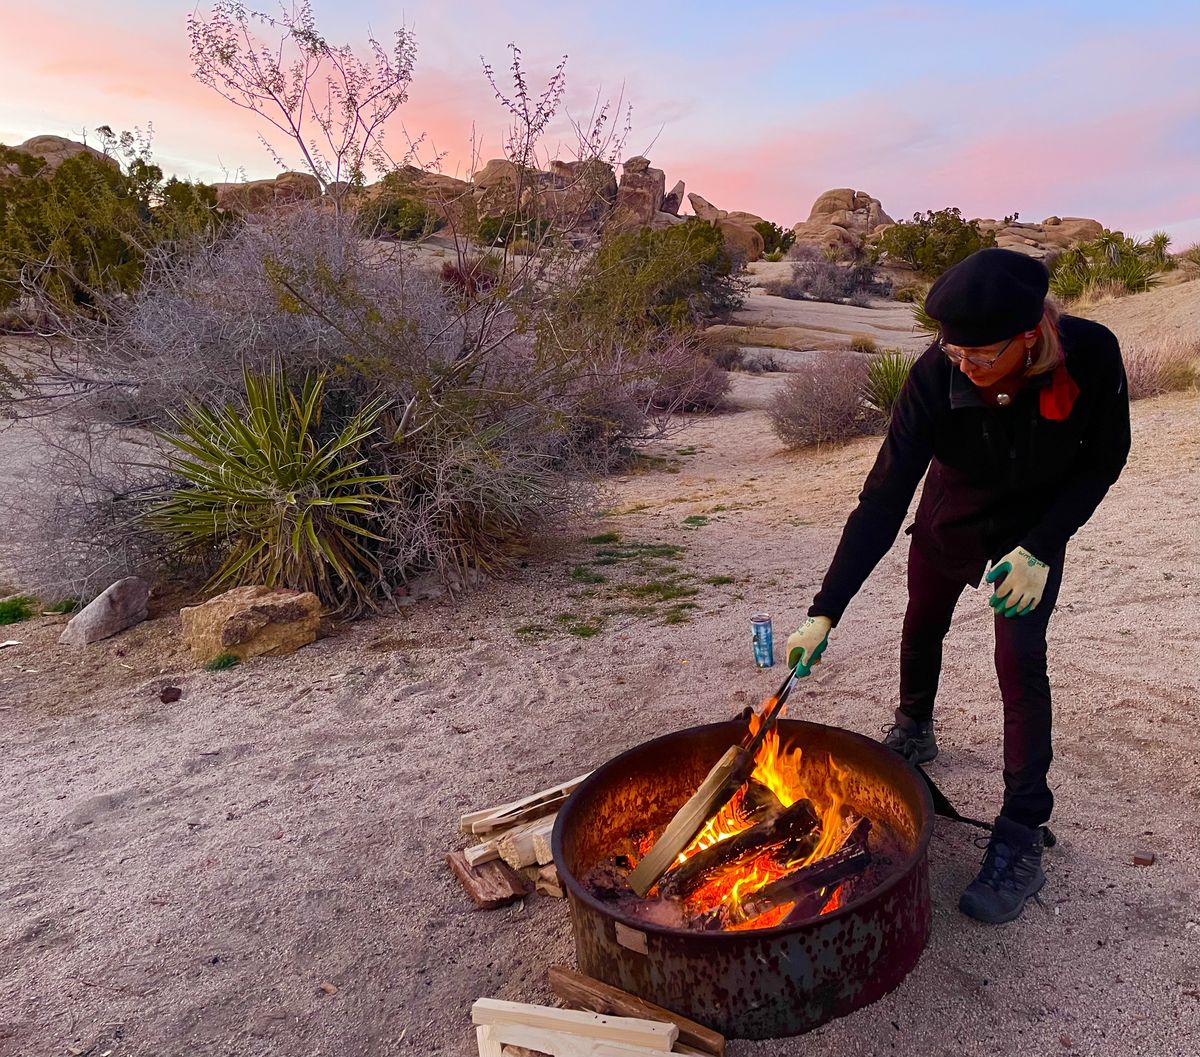 Nightly fires kept us warm in the December chill at Joshua Tree National Park. (Leslie Kelly)